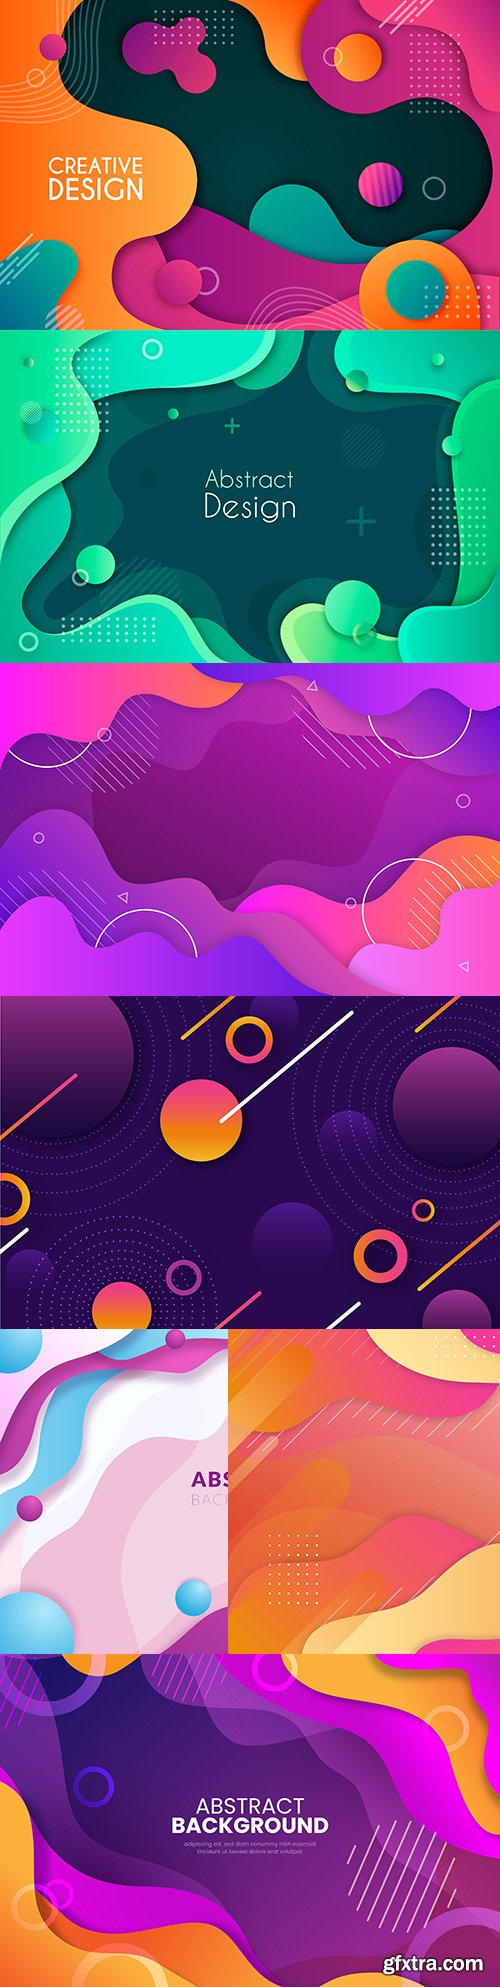 Abstract gradient wave background with colorful shapes 4
